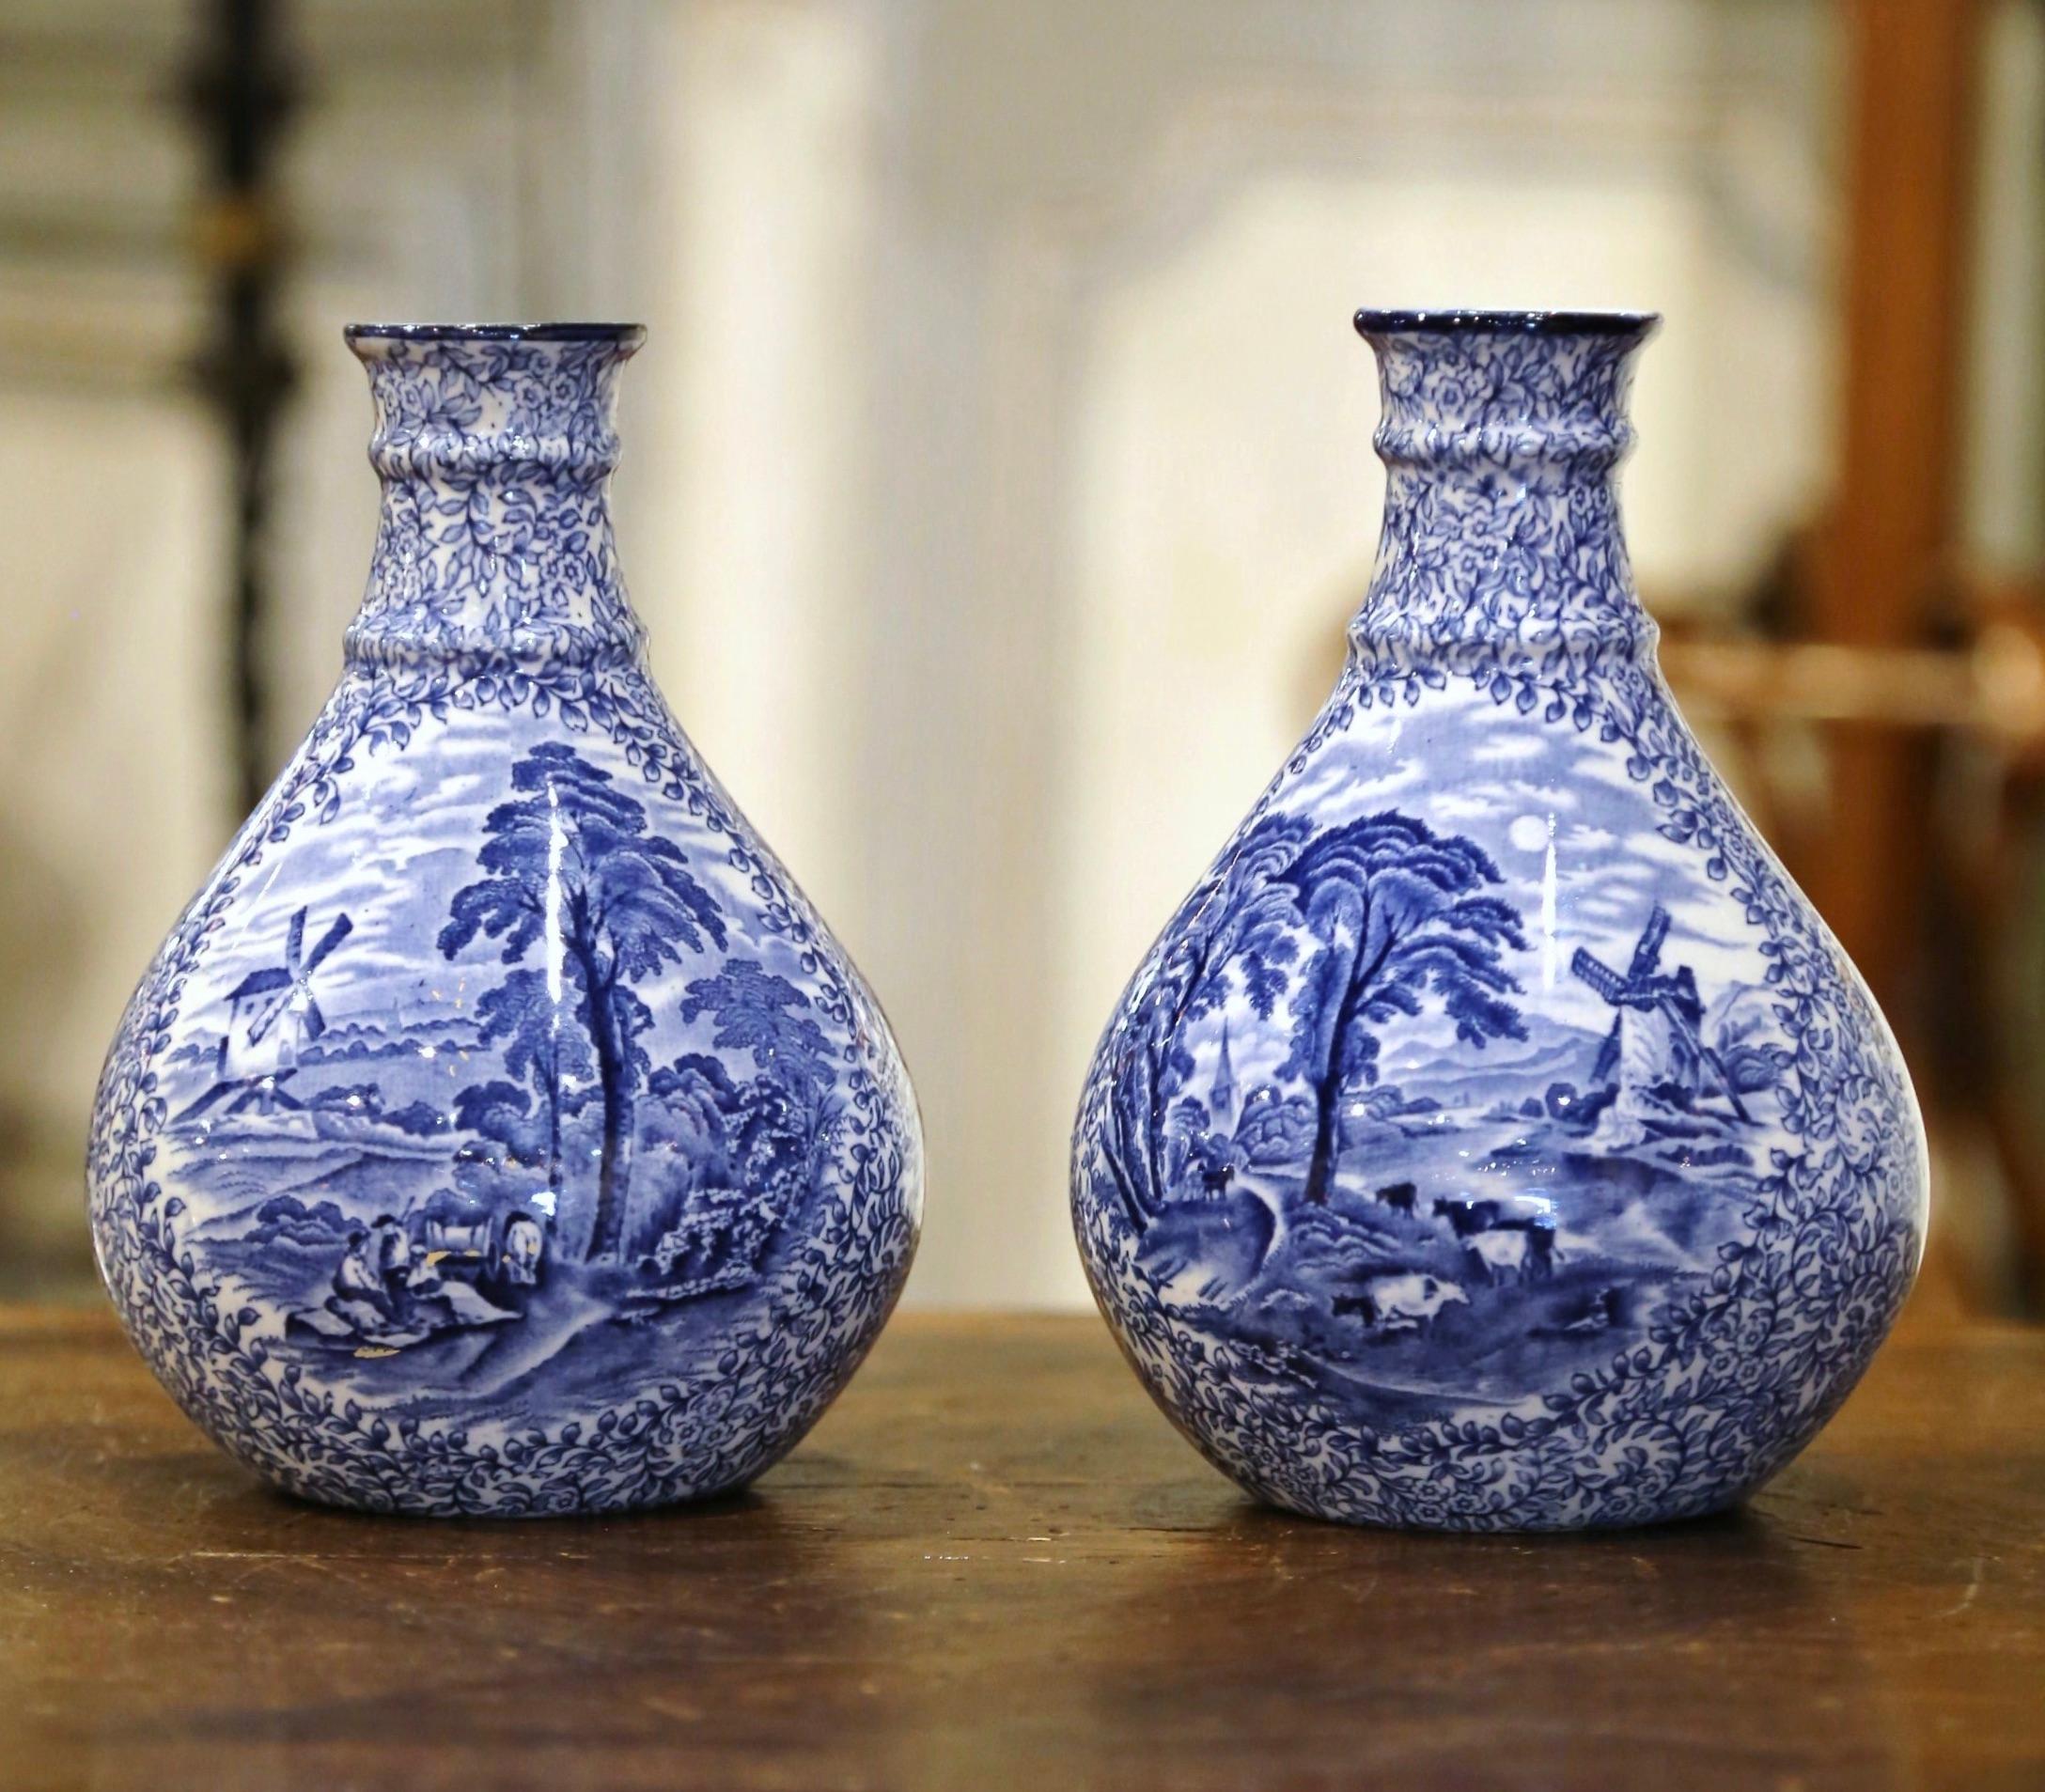 Decorate a shelf or console table with this elegant pair of antique Delft style vases. Crafted in England circa 1920, the vases are round in shape over an elegant neck. Each vessel is hand painted in the blue and white Delft palette, and each